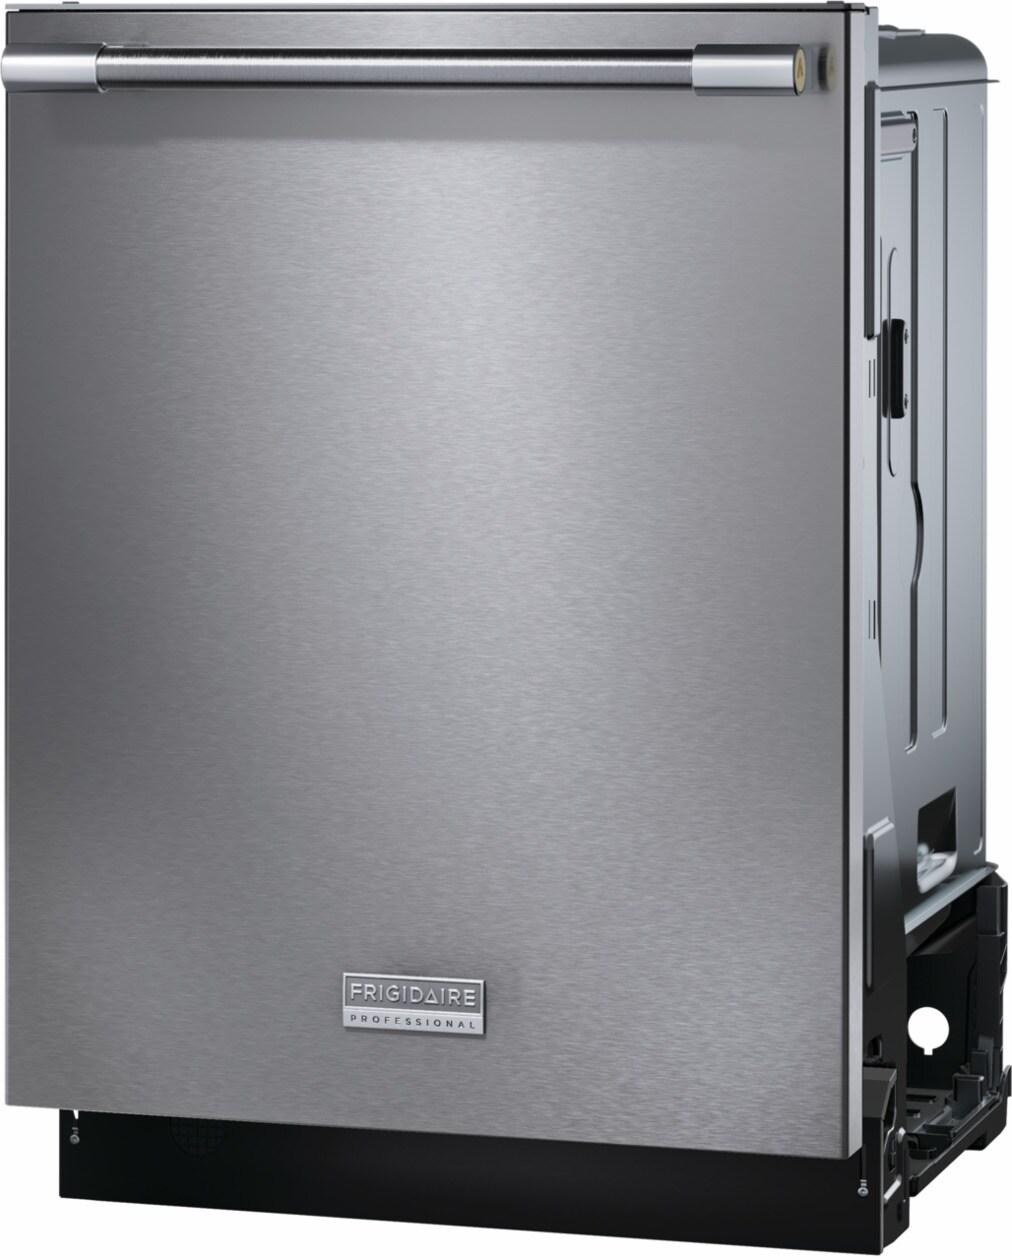 Frigidaire Professional 24" Stainless Steel Tub Built-In Dishwasher with CleanBoost™